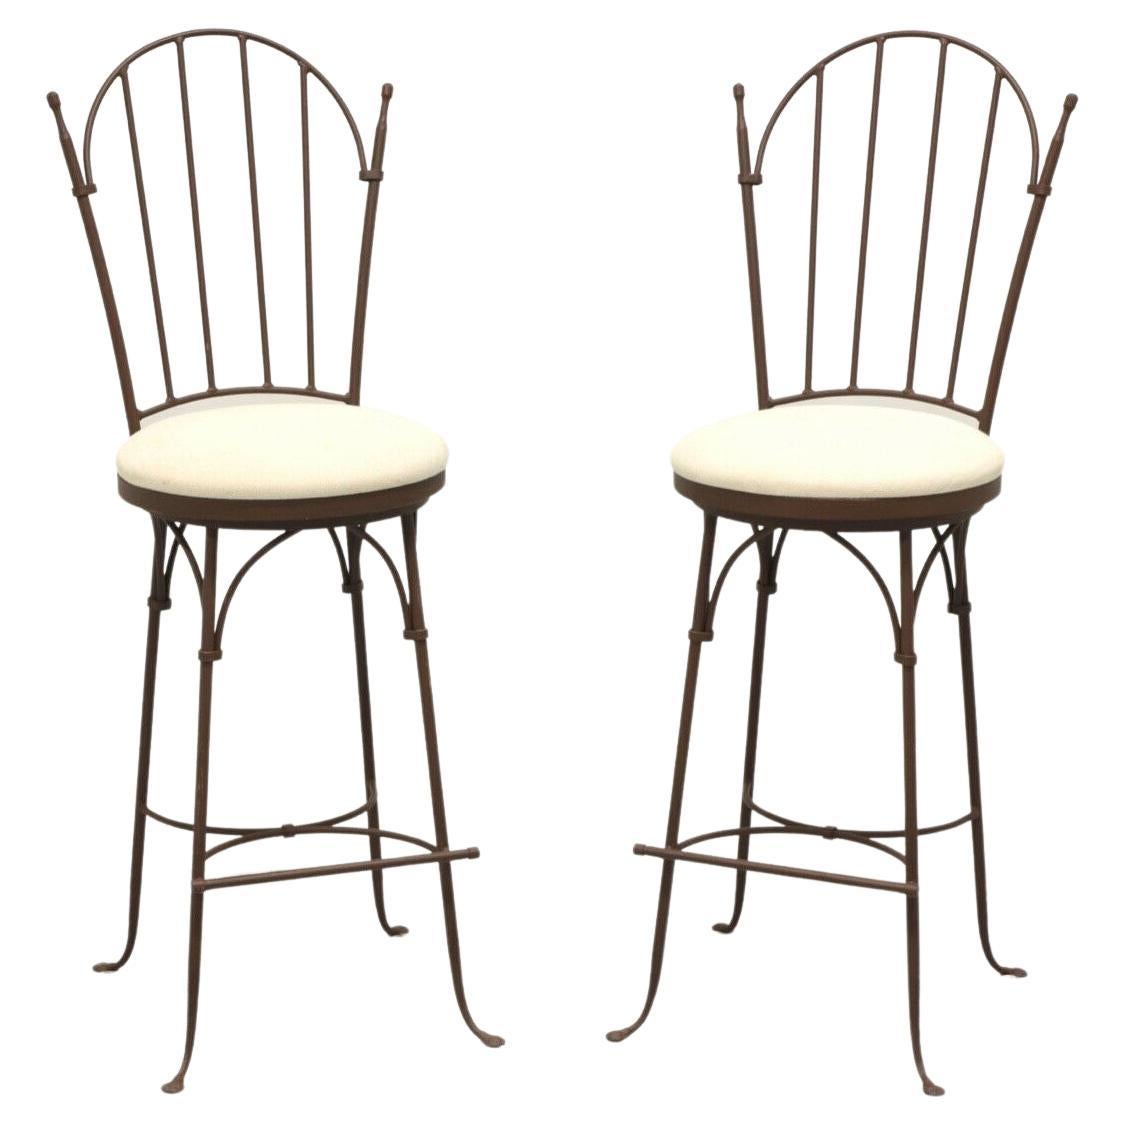 CHARLESTON FORGE Wrought Iron Shaker Arch Bar Height Swivel Stools - Pair D